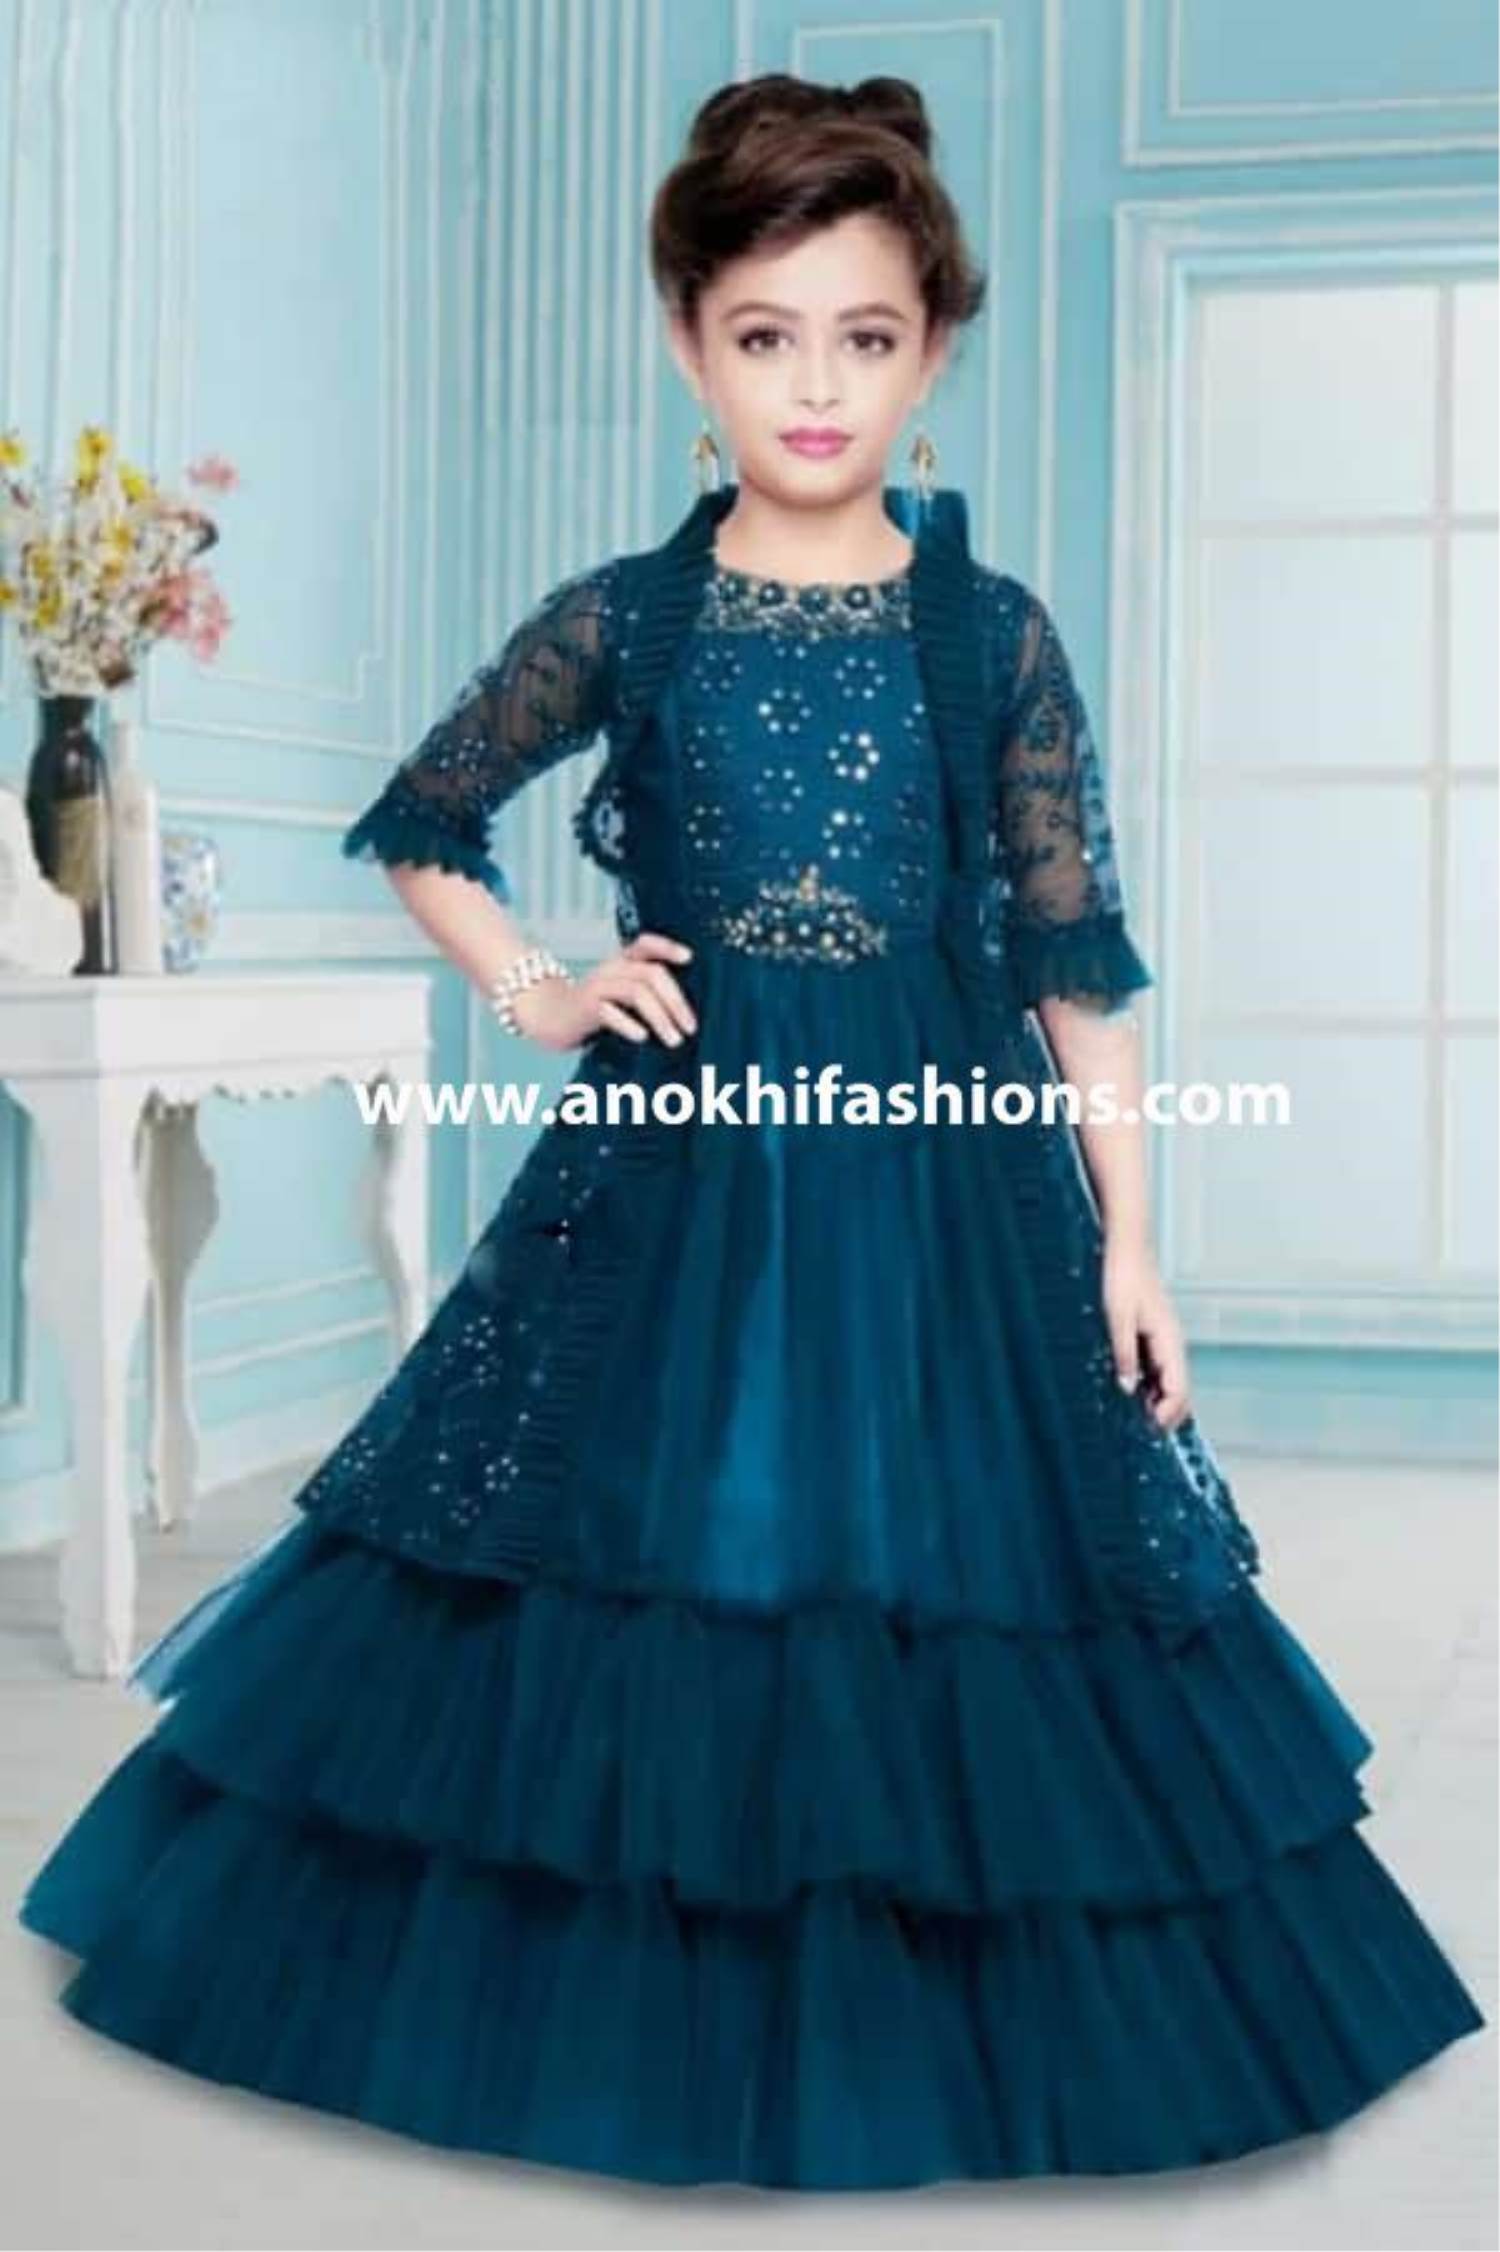 HAVY SOFT NET FIROZI COLOR SEMISTICHED CHAINSTICHE EMBROIDERED GOWN FOR  WOMANS Color: Blue Fabric: Net Type: Semi Stitched Style: Embroidered  Design Type: Indo-western Sleeve Length: Sleeveless Occasion: Wedding  Sleeve Style: Cap Sleeve